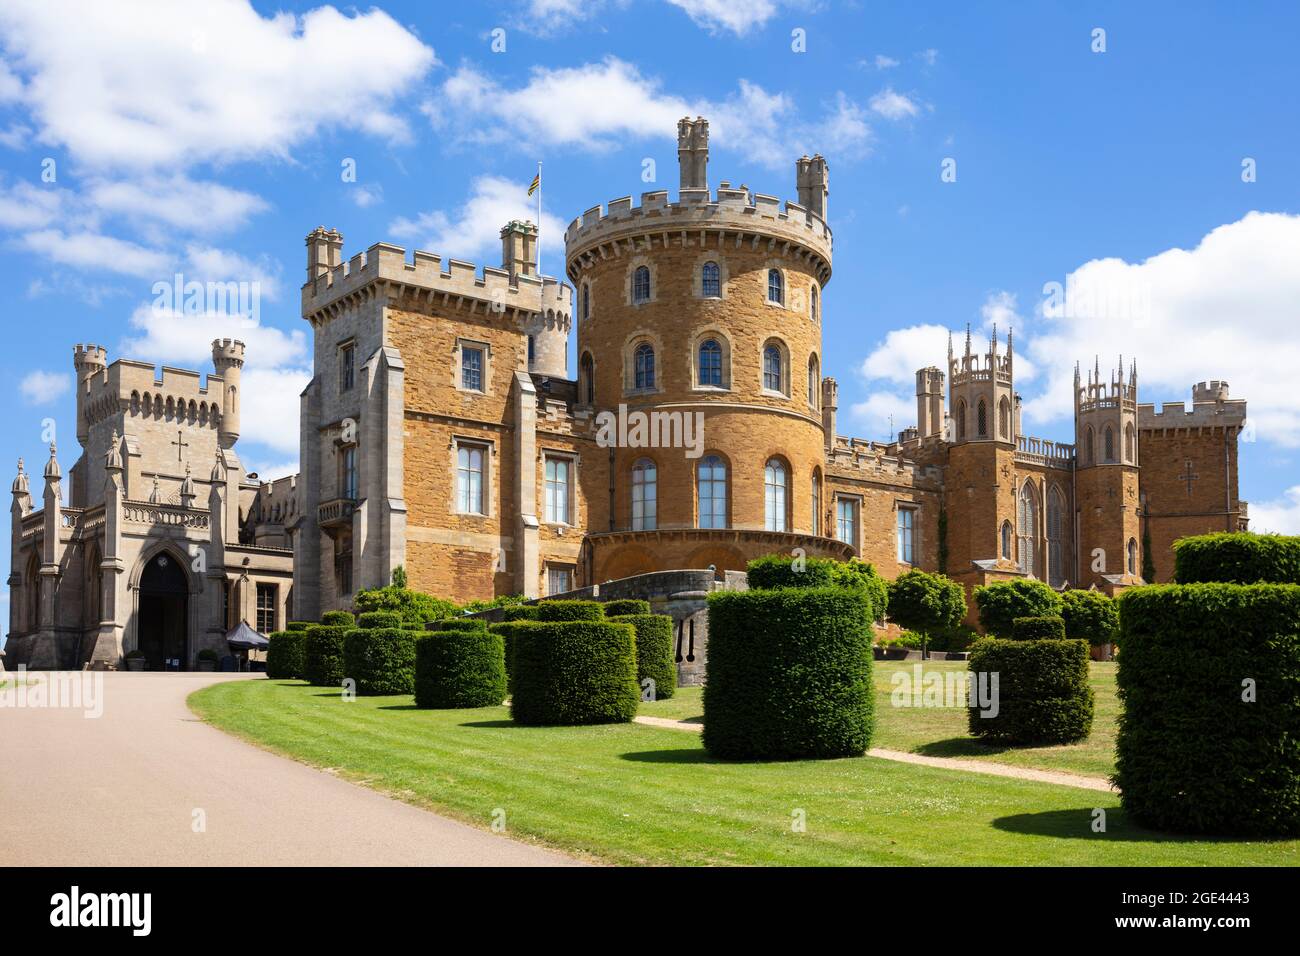 Belvoir Castle Valle of Belvoir Grantham Leicestershire England GB Europa Stockfoto